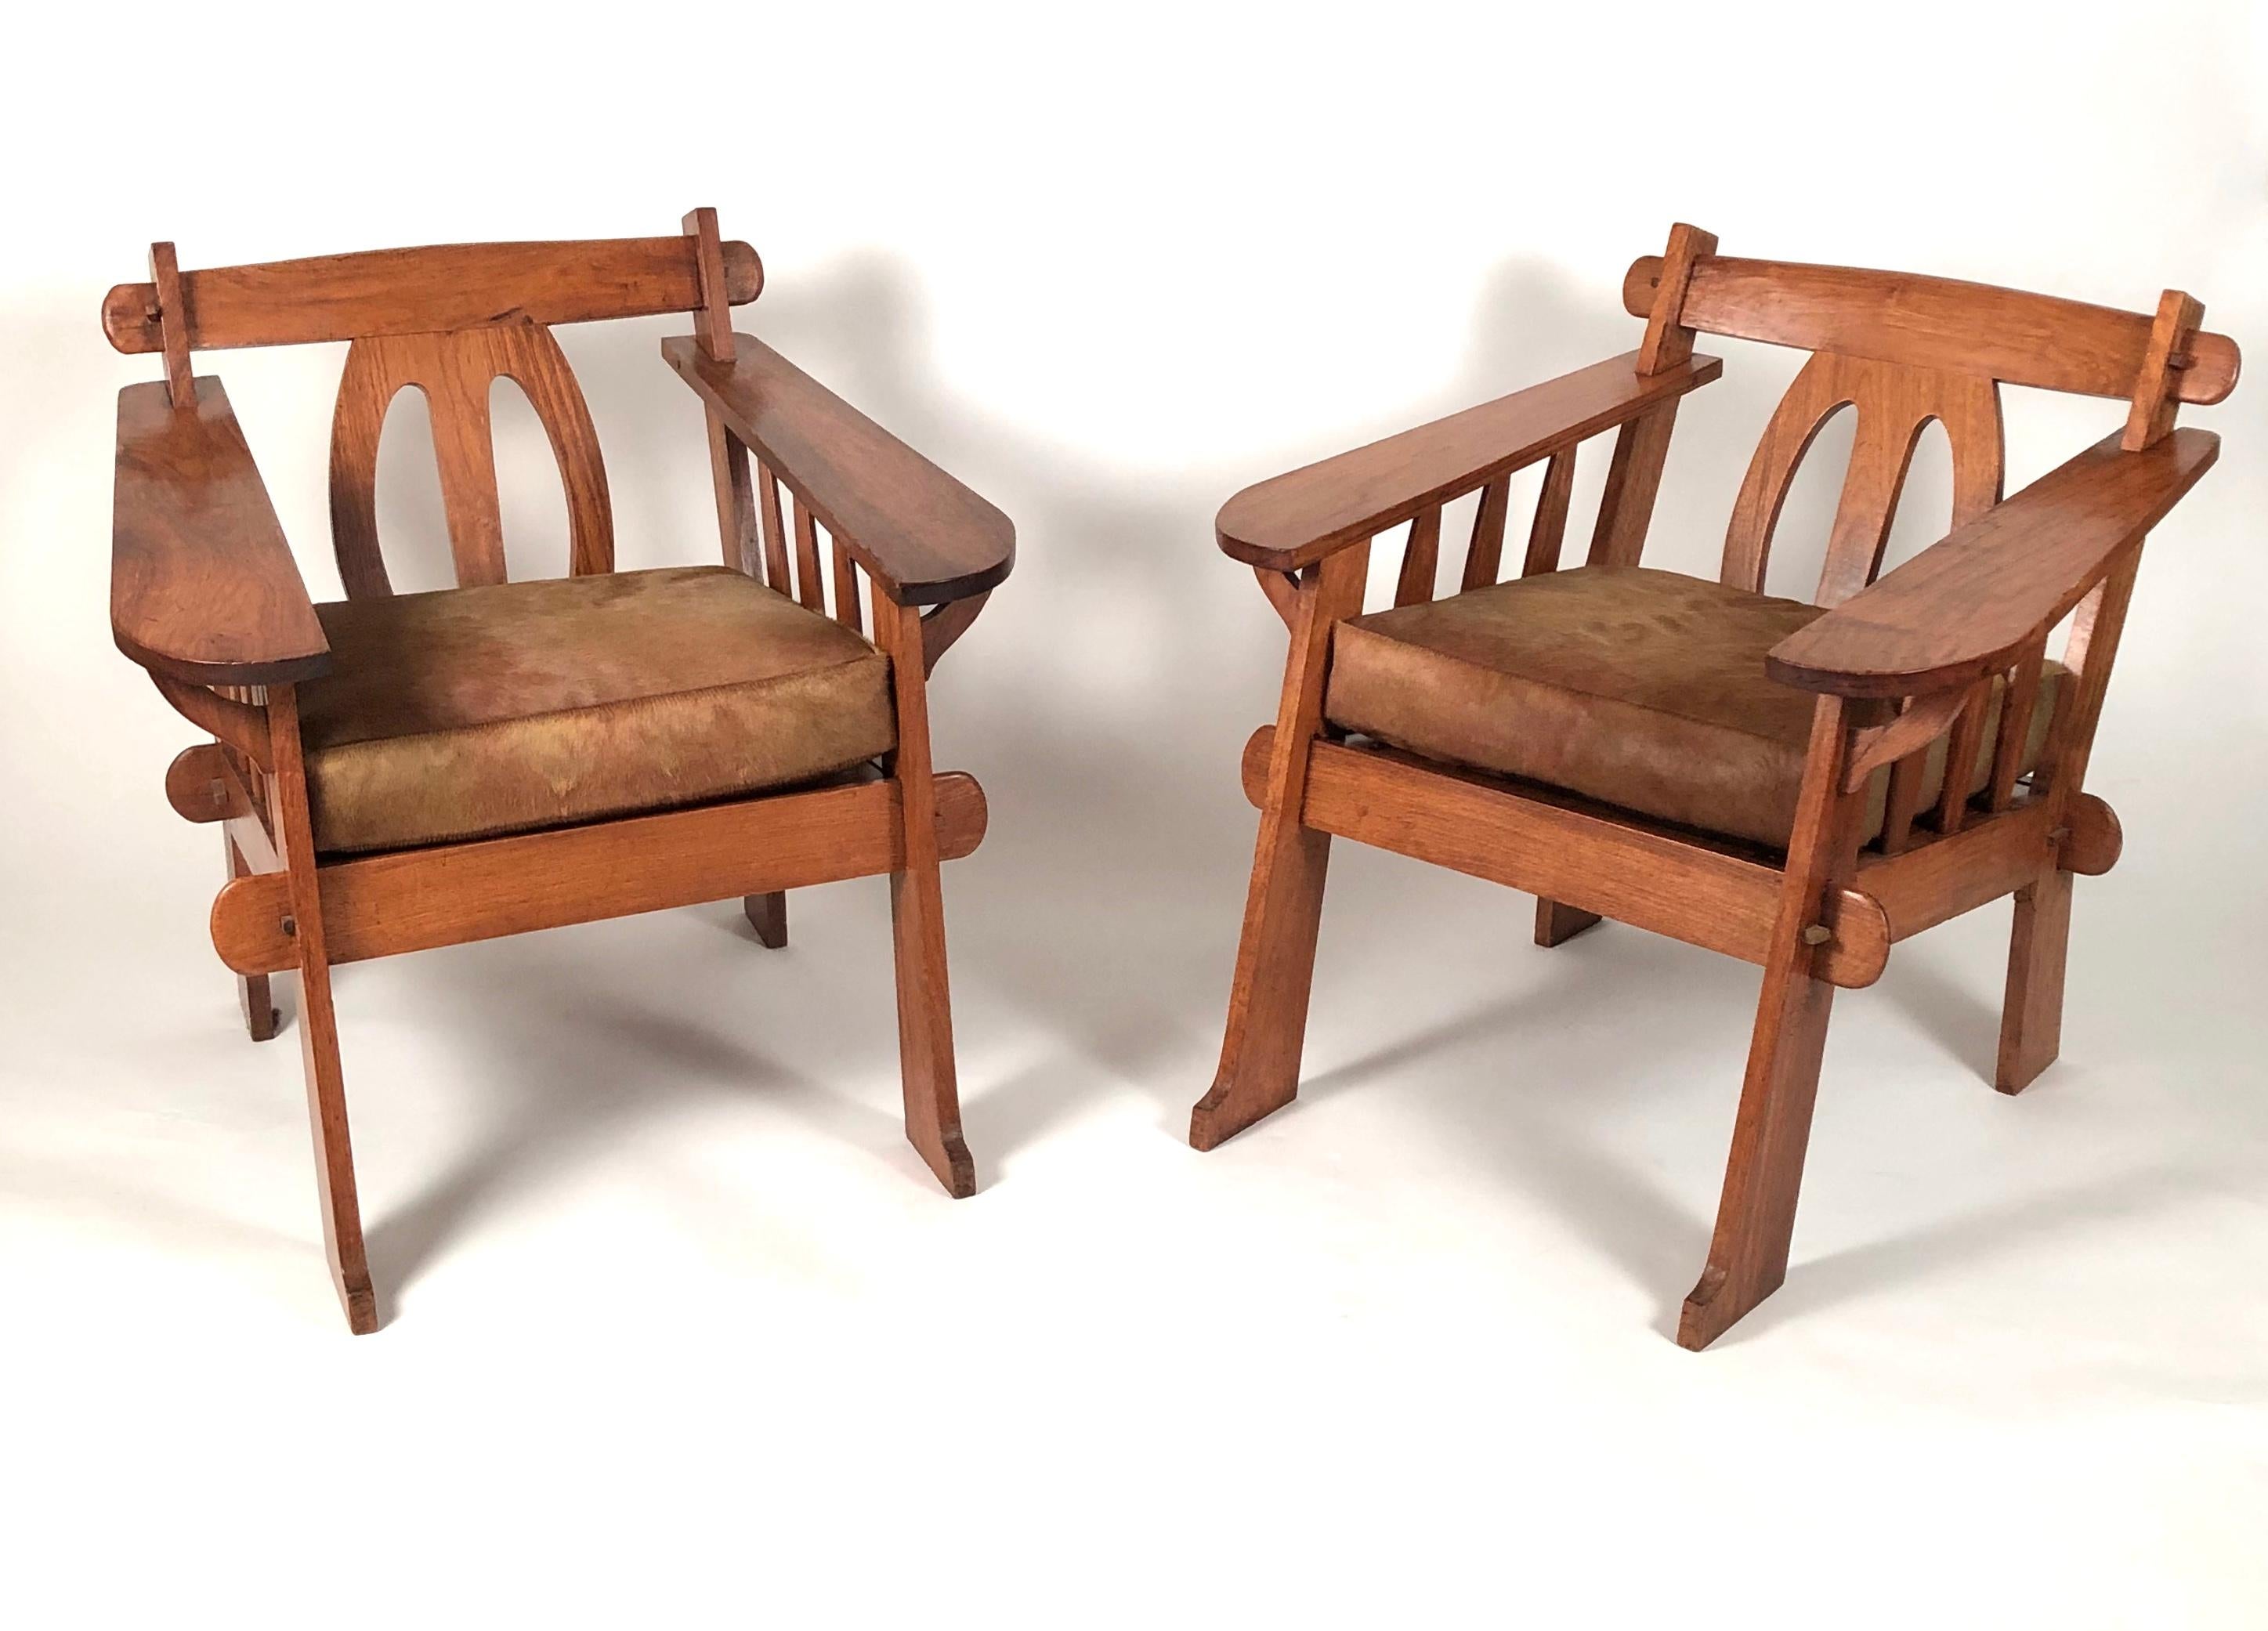 A beautifully made pair of Hawaiian teak lounge chairs, made for shipboard travel, circa 1930s, with mortise and tenon construction, each back with geometric oval splats, flanked by wide paddle arms above a slatted seat with loose deer hide seat